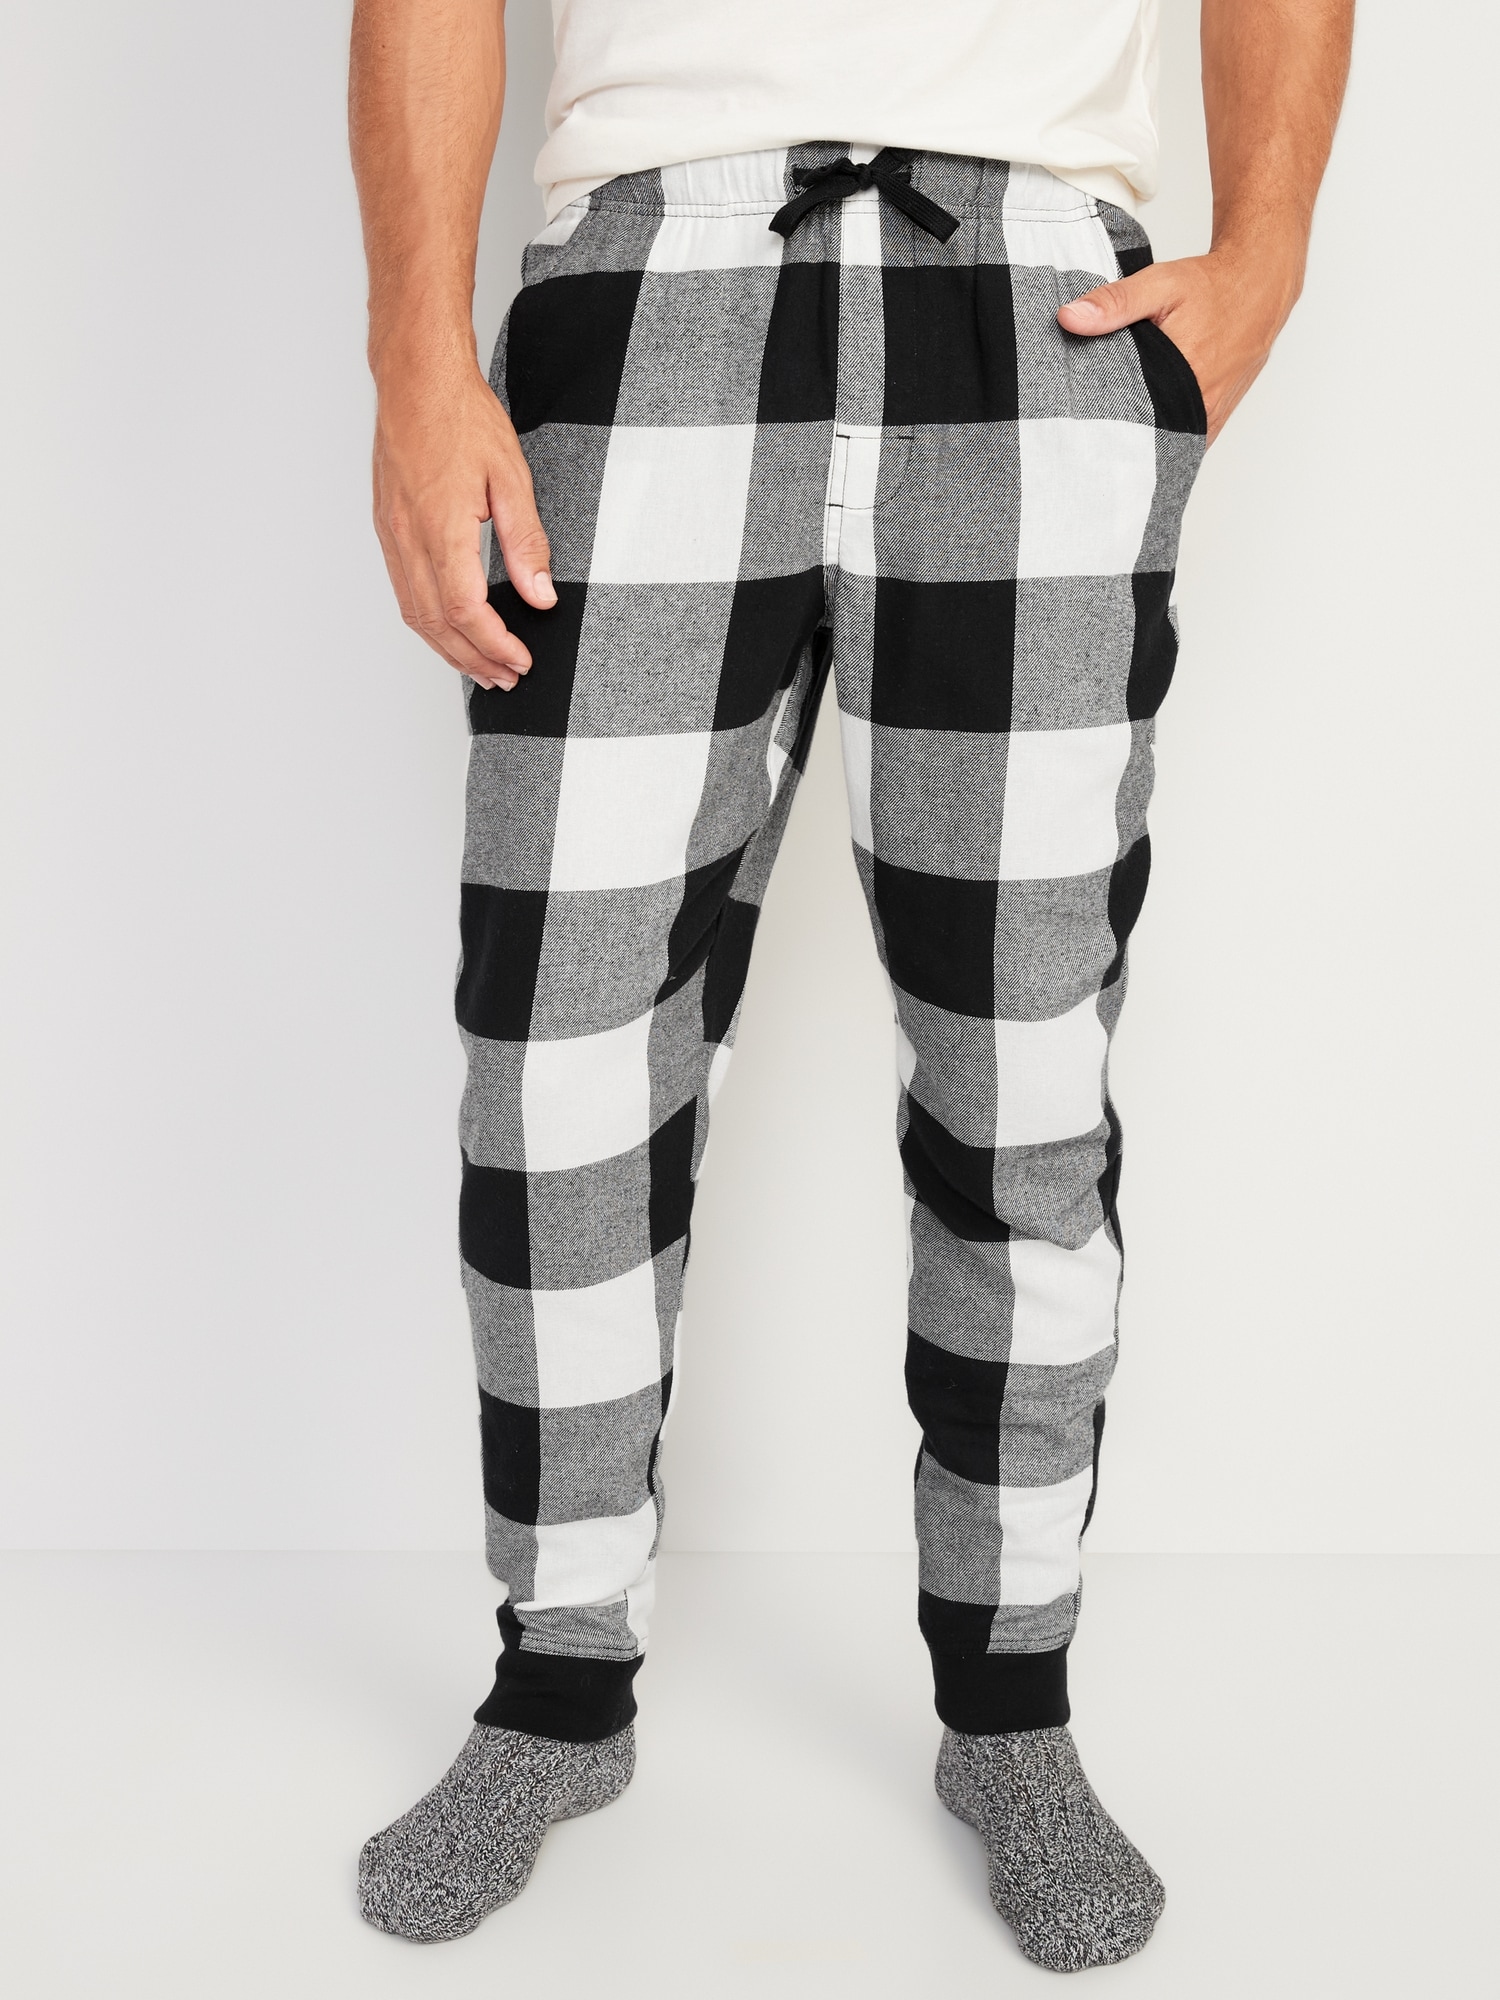 Old Navy Matching Plaid Flannel Jogger Pajama Pants for Men multi. 1